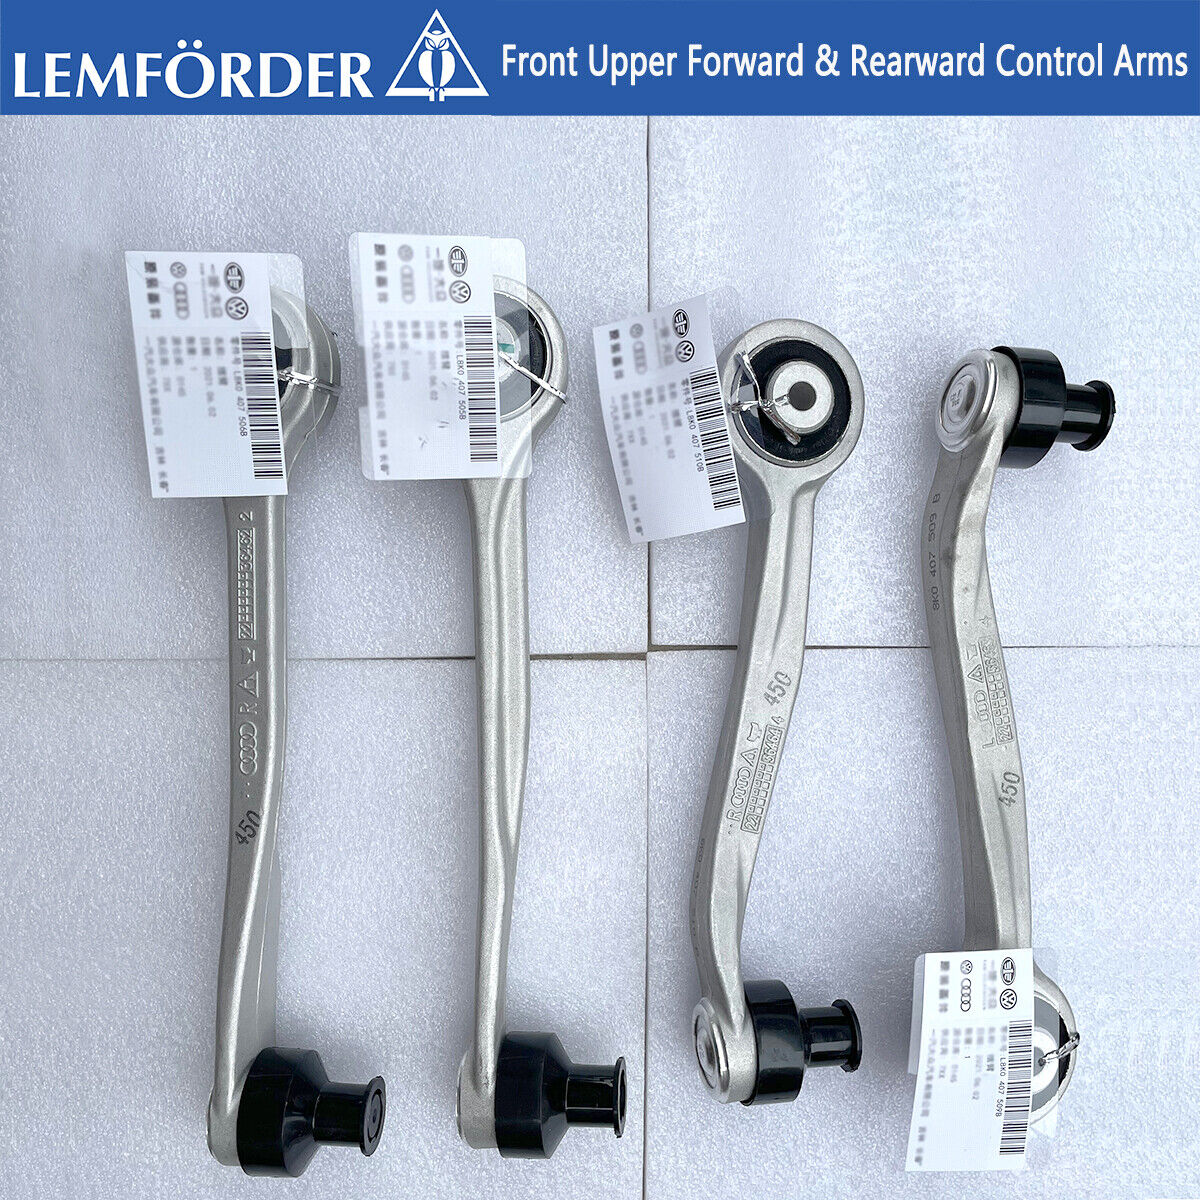 4X Lemforder OEM Front Upper Control Arm with Ball Joint  for A4 A5 S4 Q5 B8